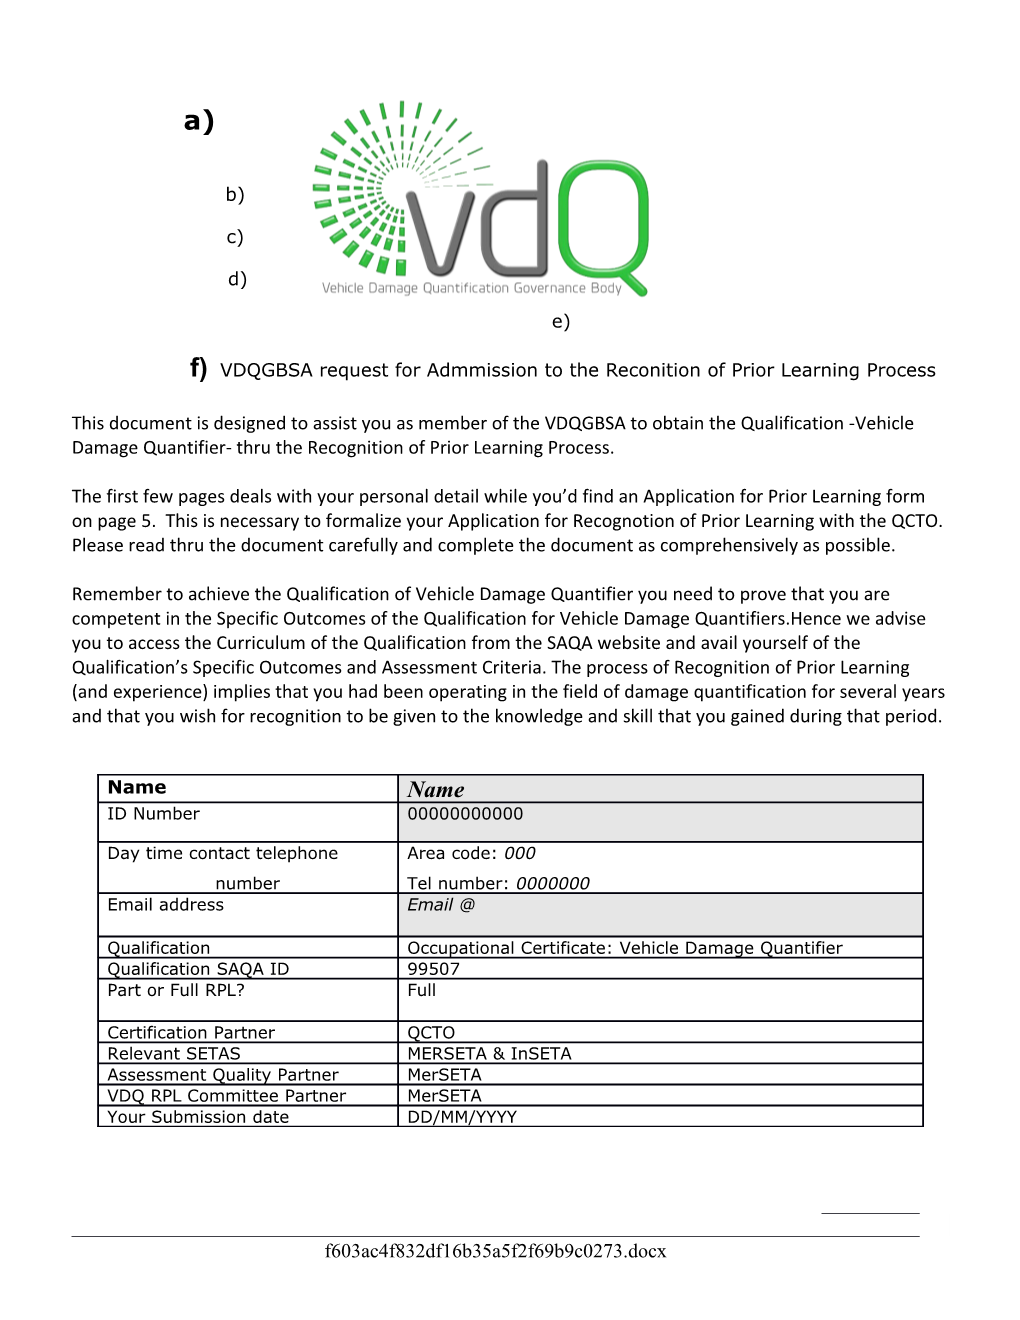 VDQGBSA Request for Admmission to the Reconition of Prior Learning Process